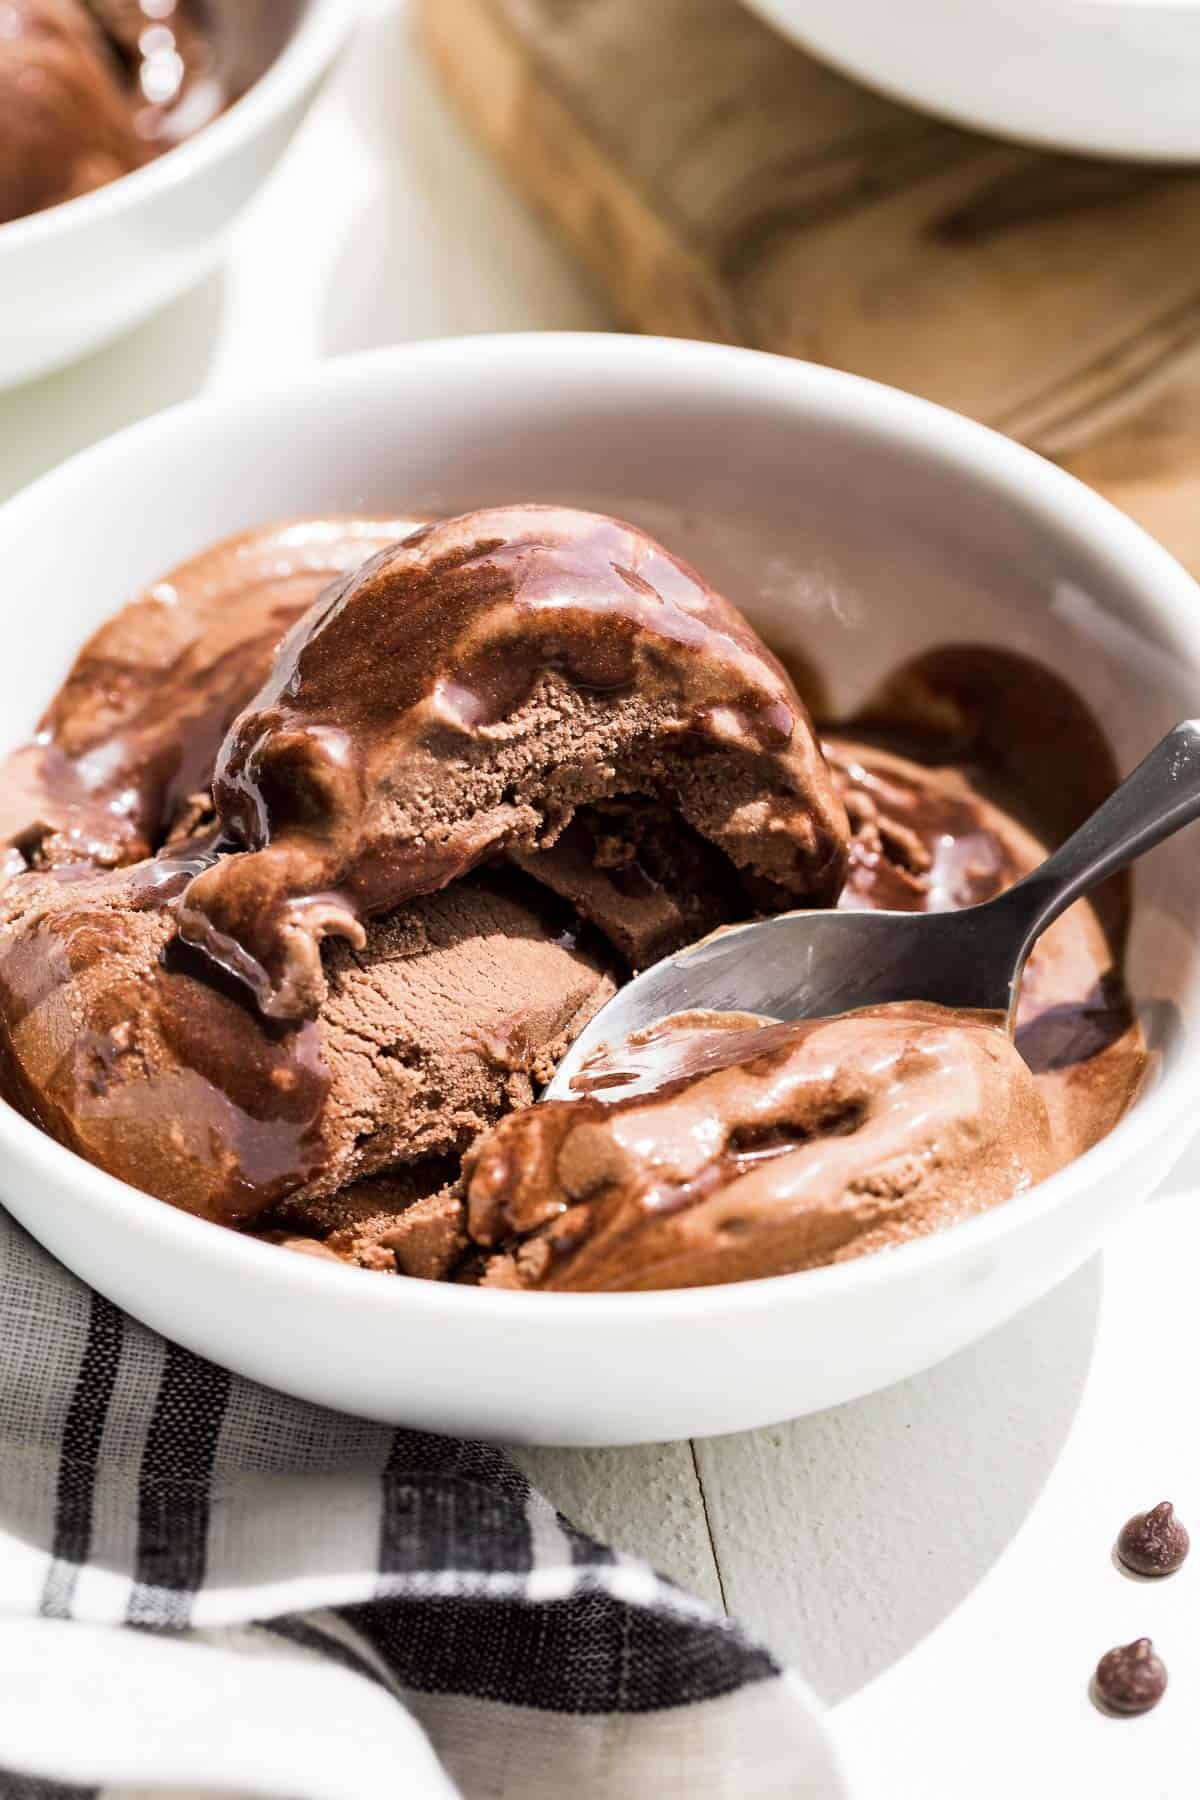 Close up view of chocolate avocado ice cream in a white bowl with a bite scooped out.